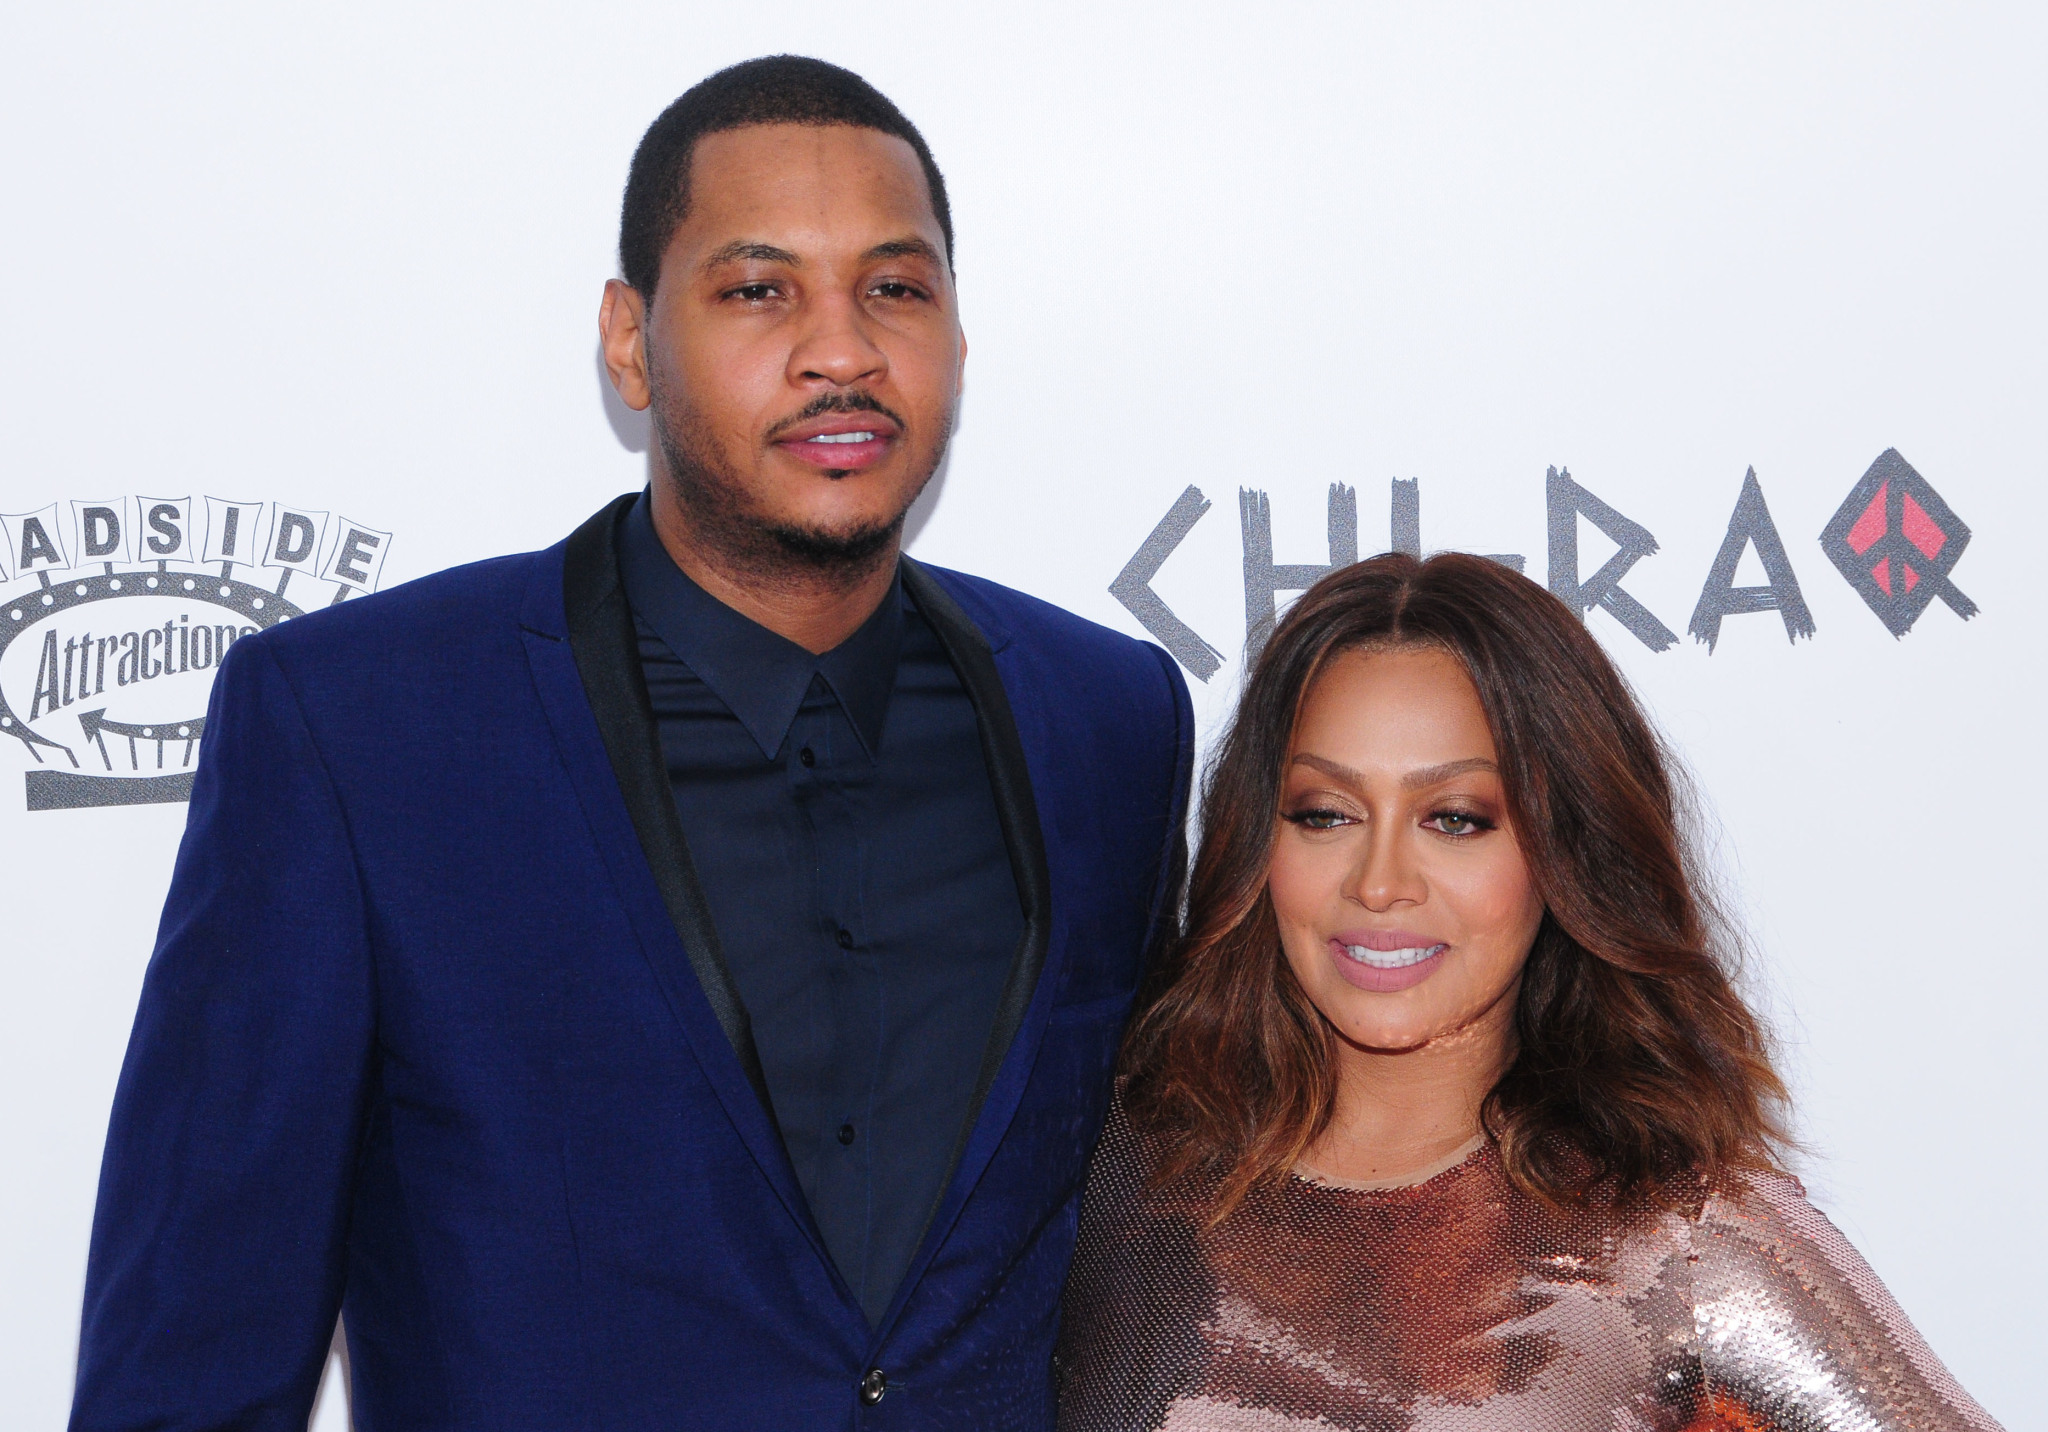 Mystery gal seen yachting with Carmelo Anthony revealed